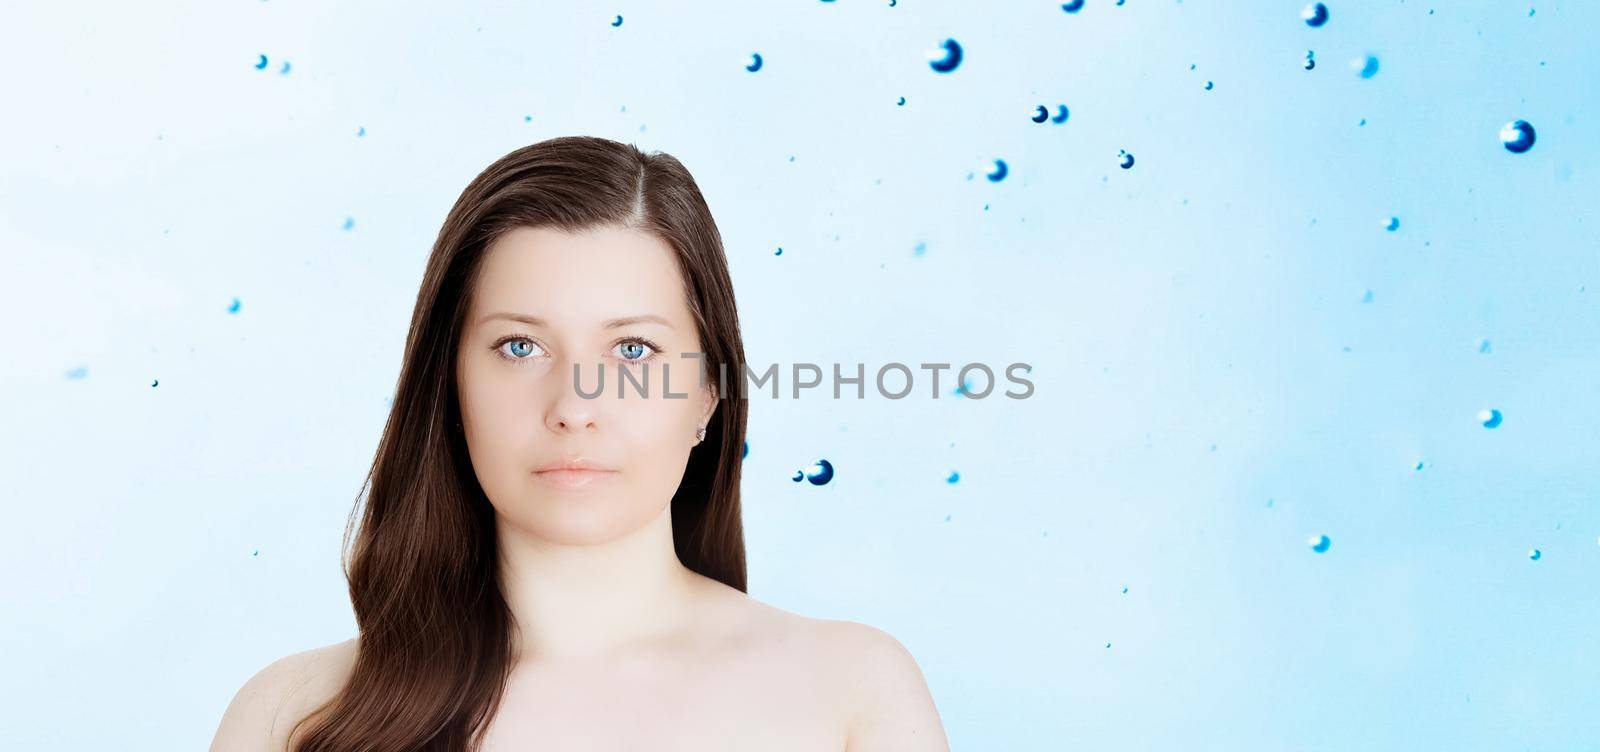 Rejuvenation skincare and beauty ad, beauty face portrait of young woman with healthy clean skin, blue cosmetic liquid drops on background by Anneleven